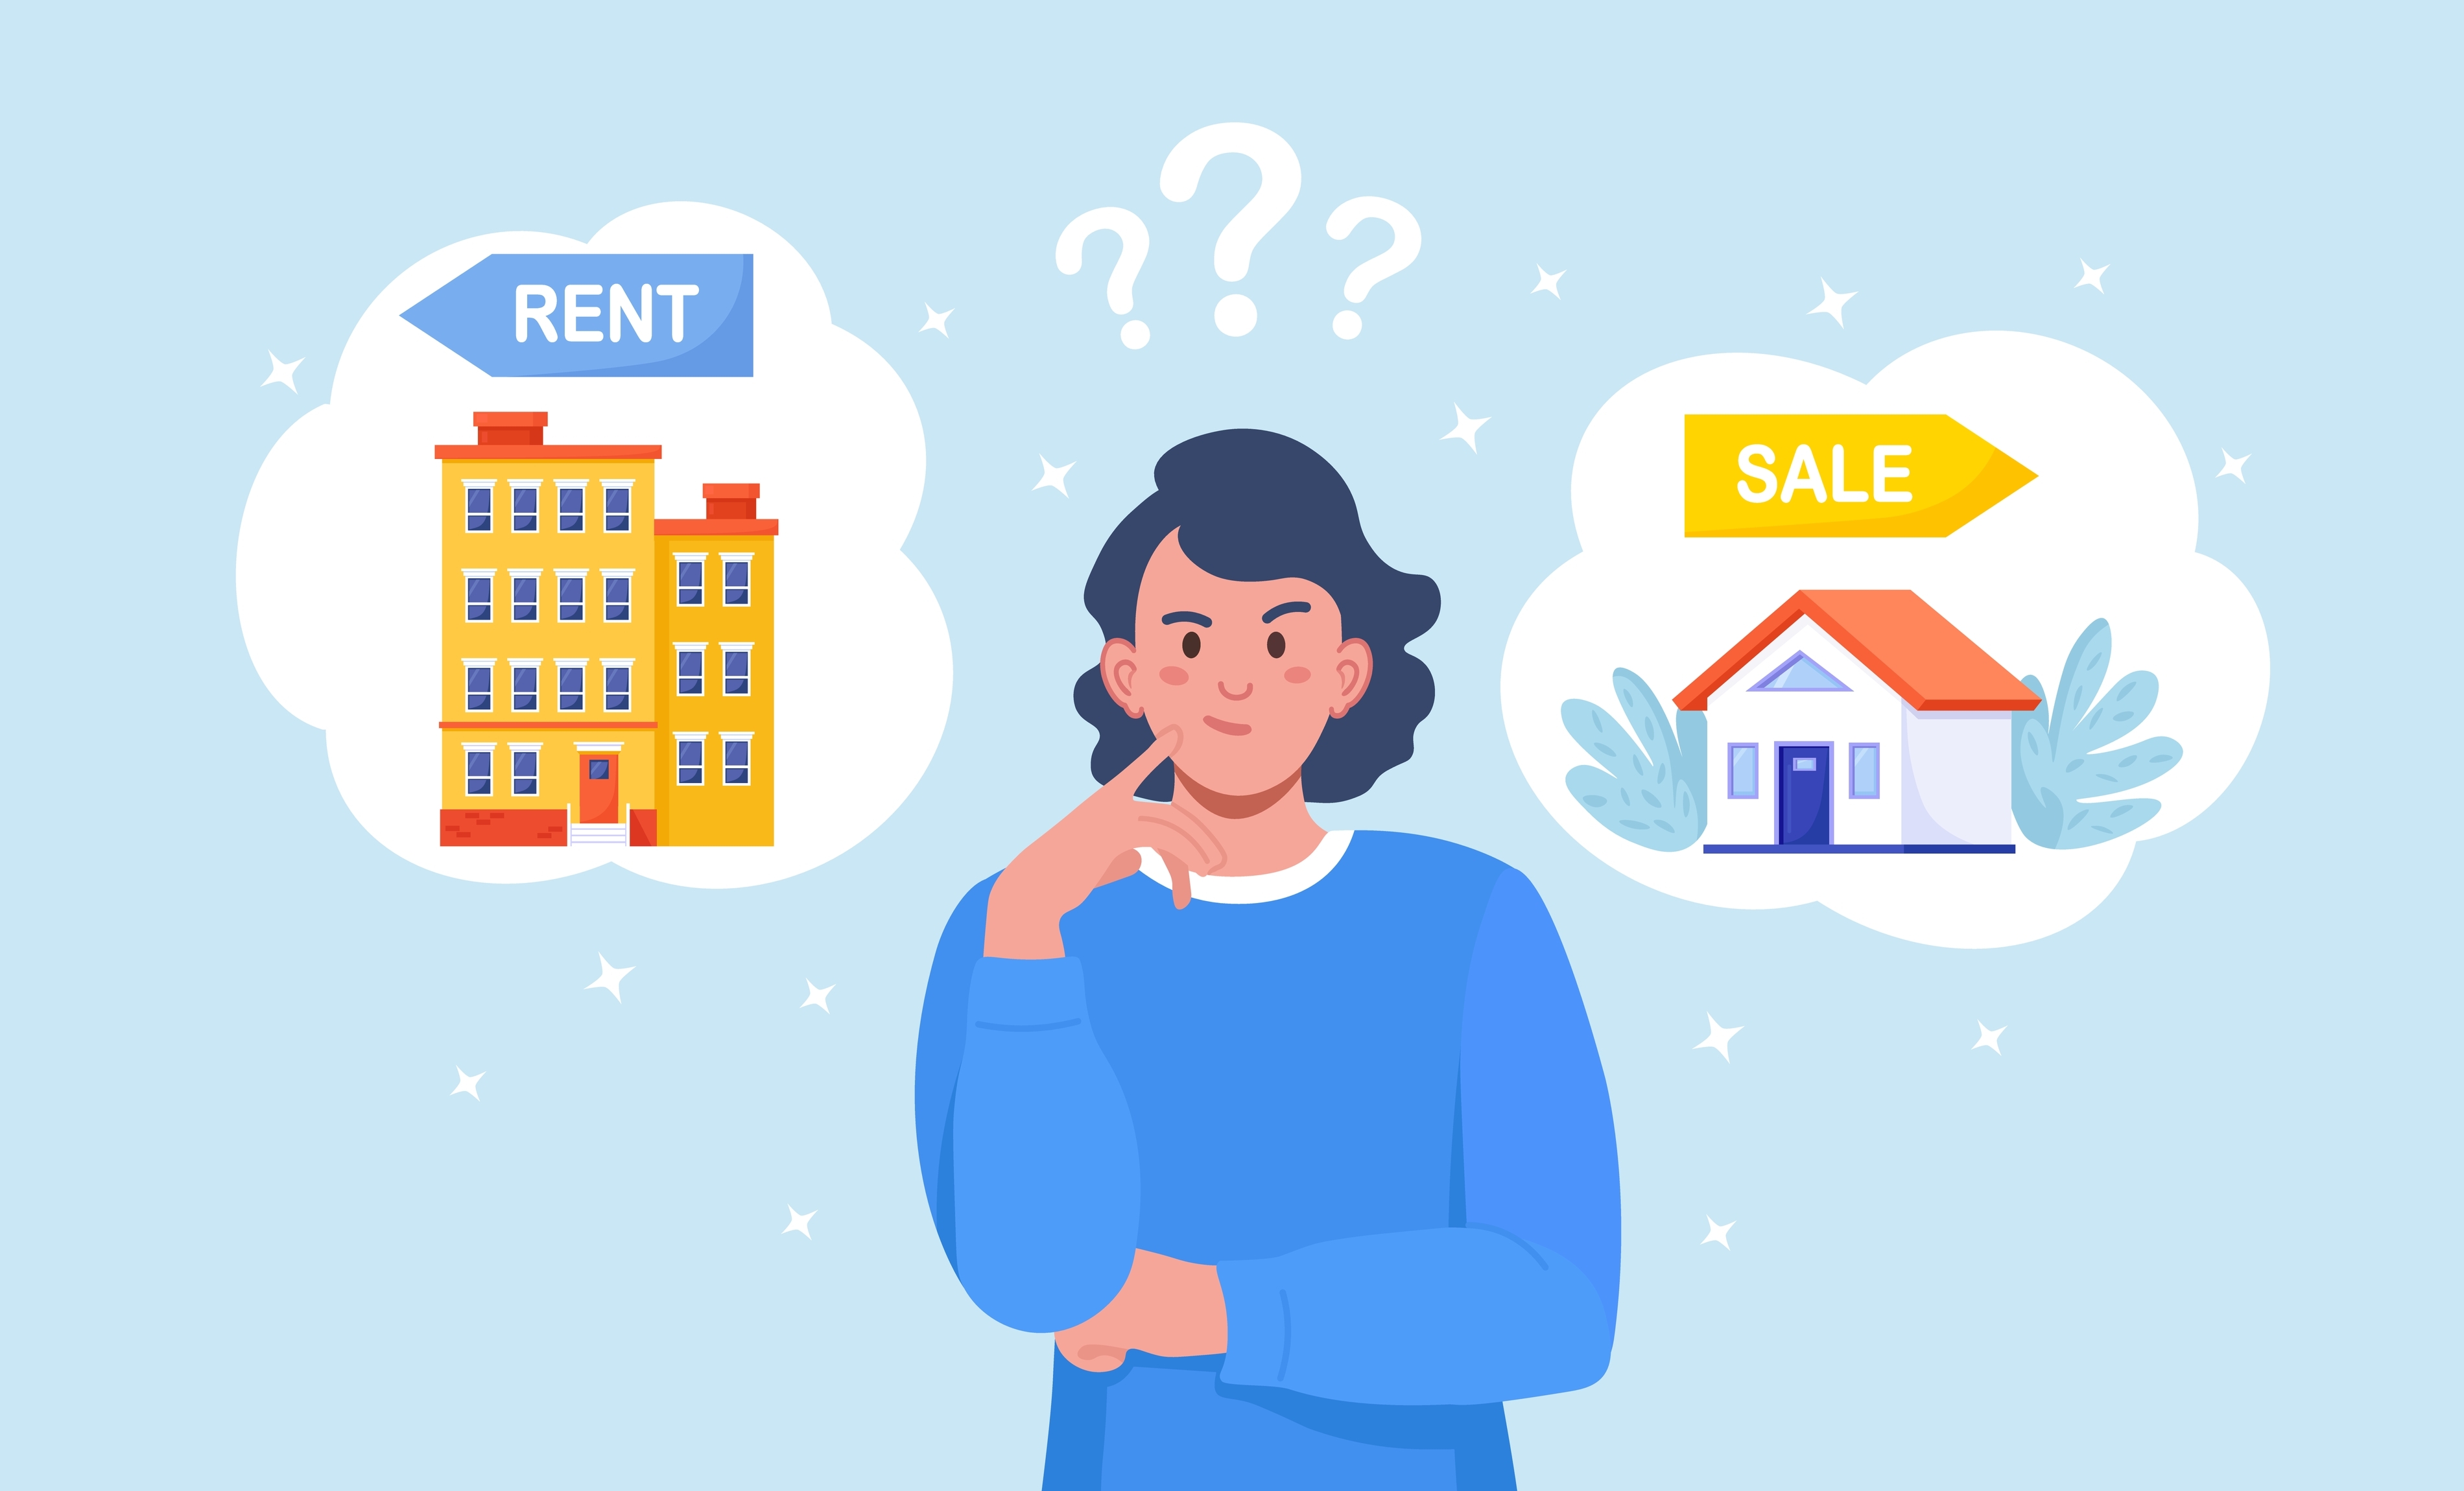 Should I sell or rent my house?